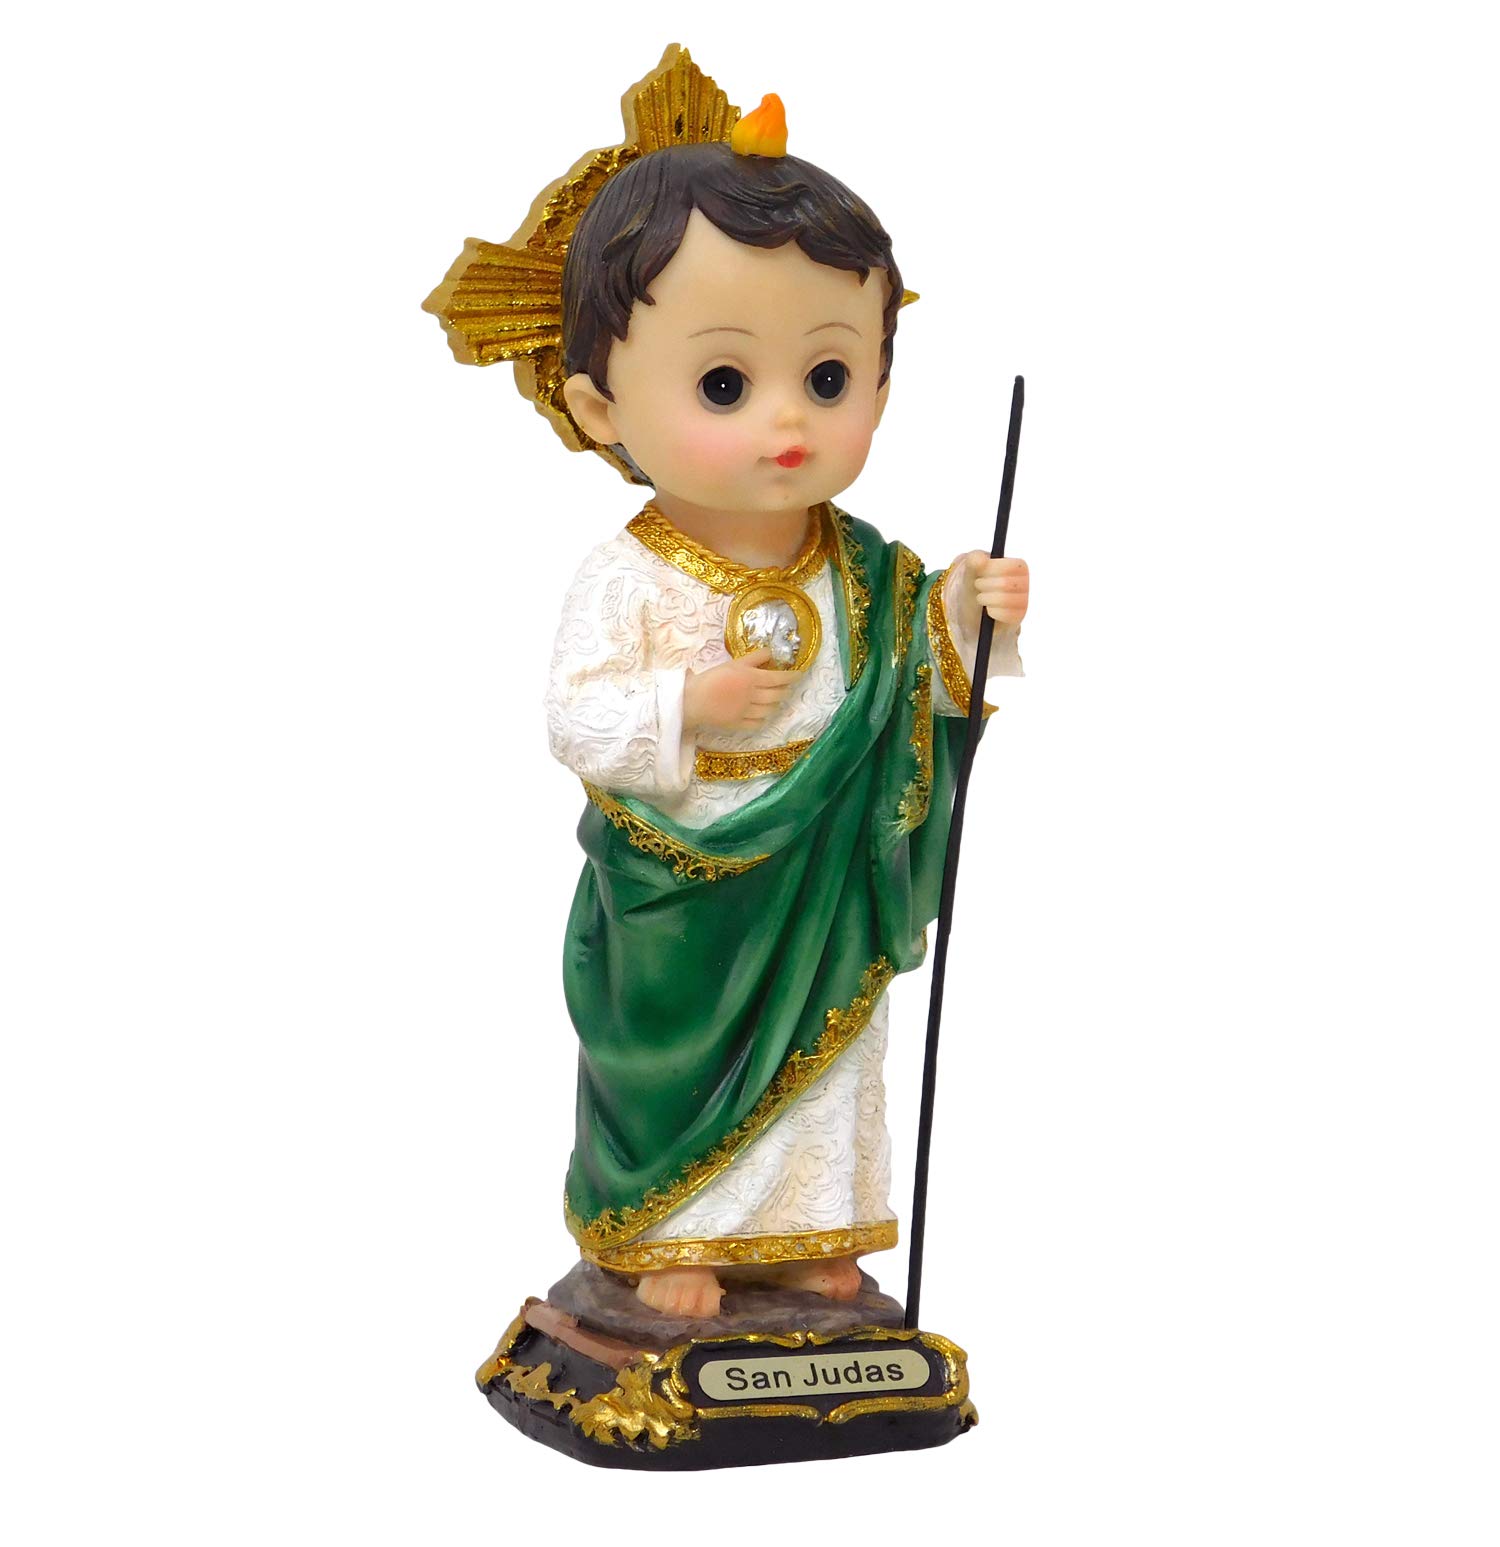 Baby Boys Girls Catholic 8" Statues Resin Infant Figures Religious Gift Judas Guadalupe Michael (St. Jude)